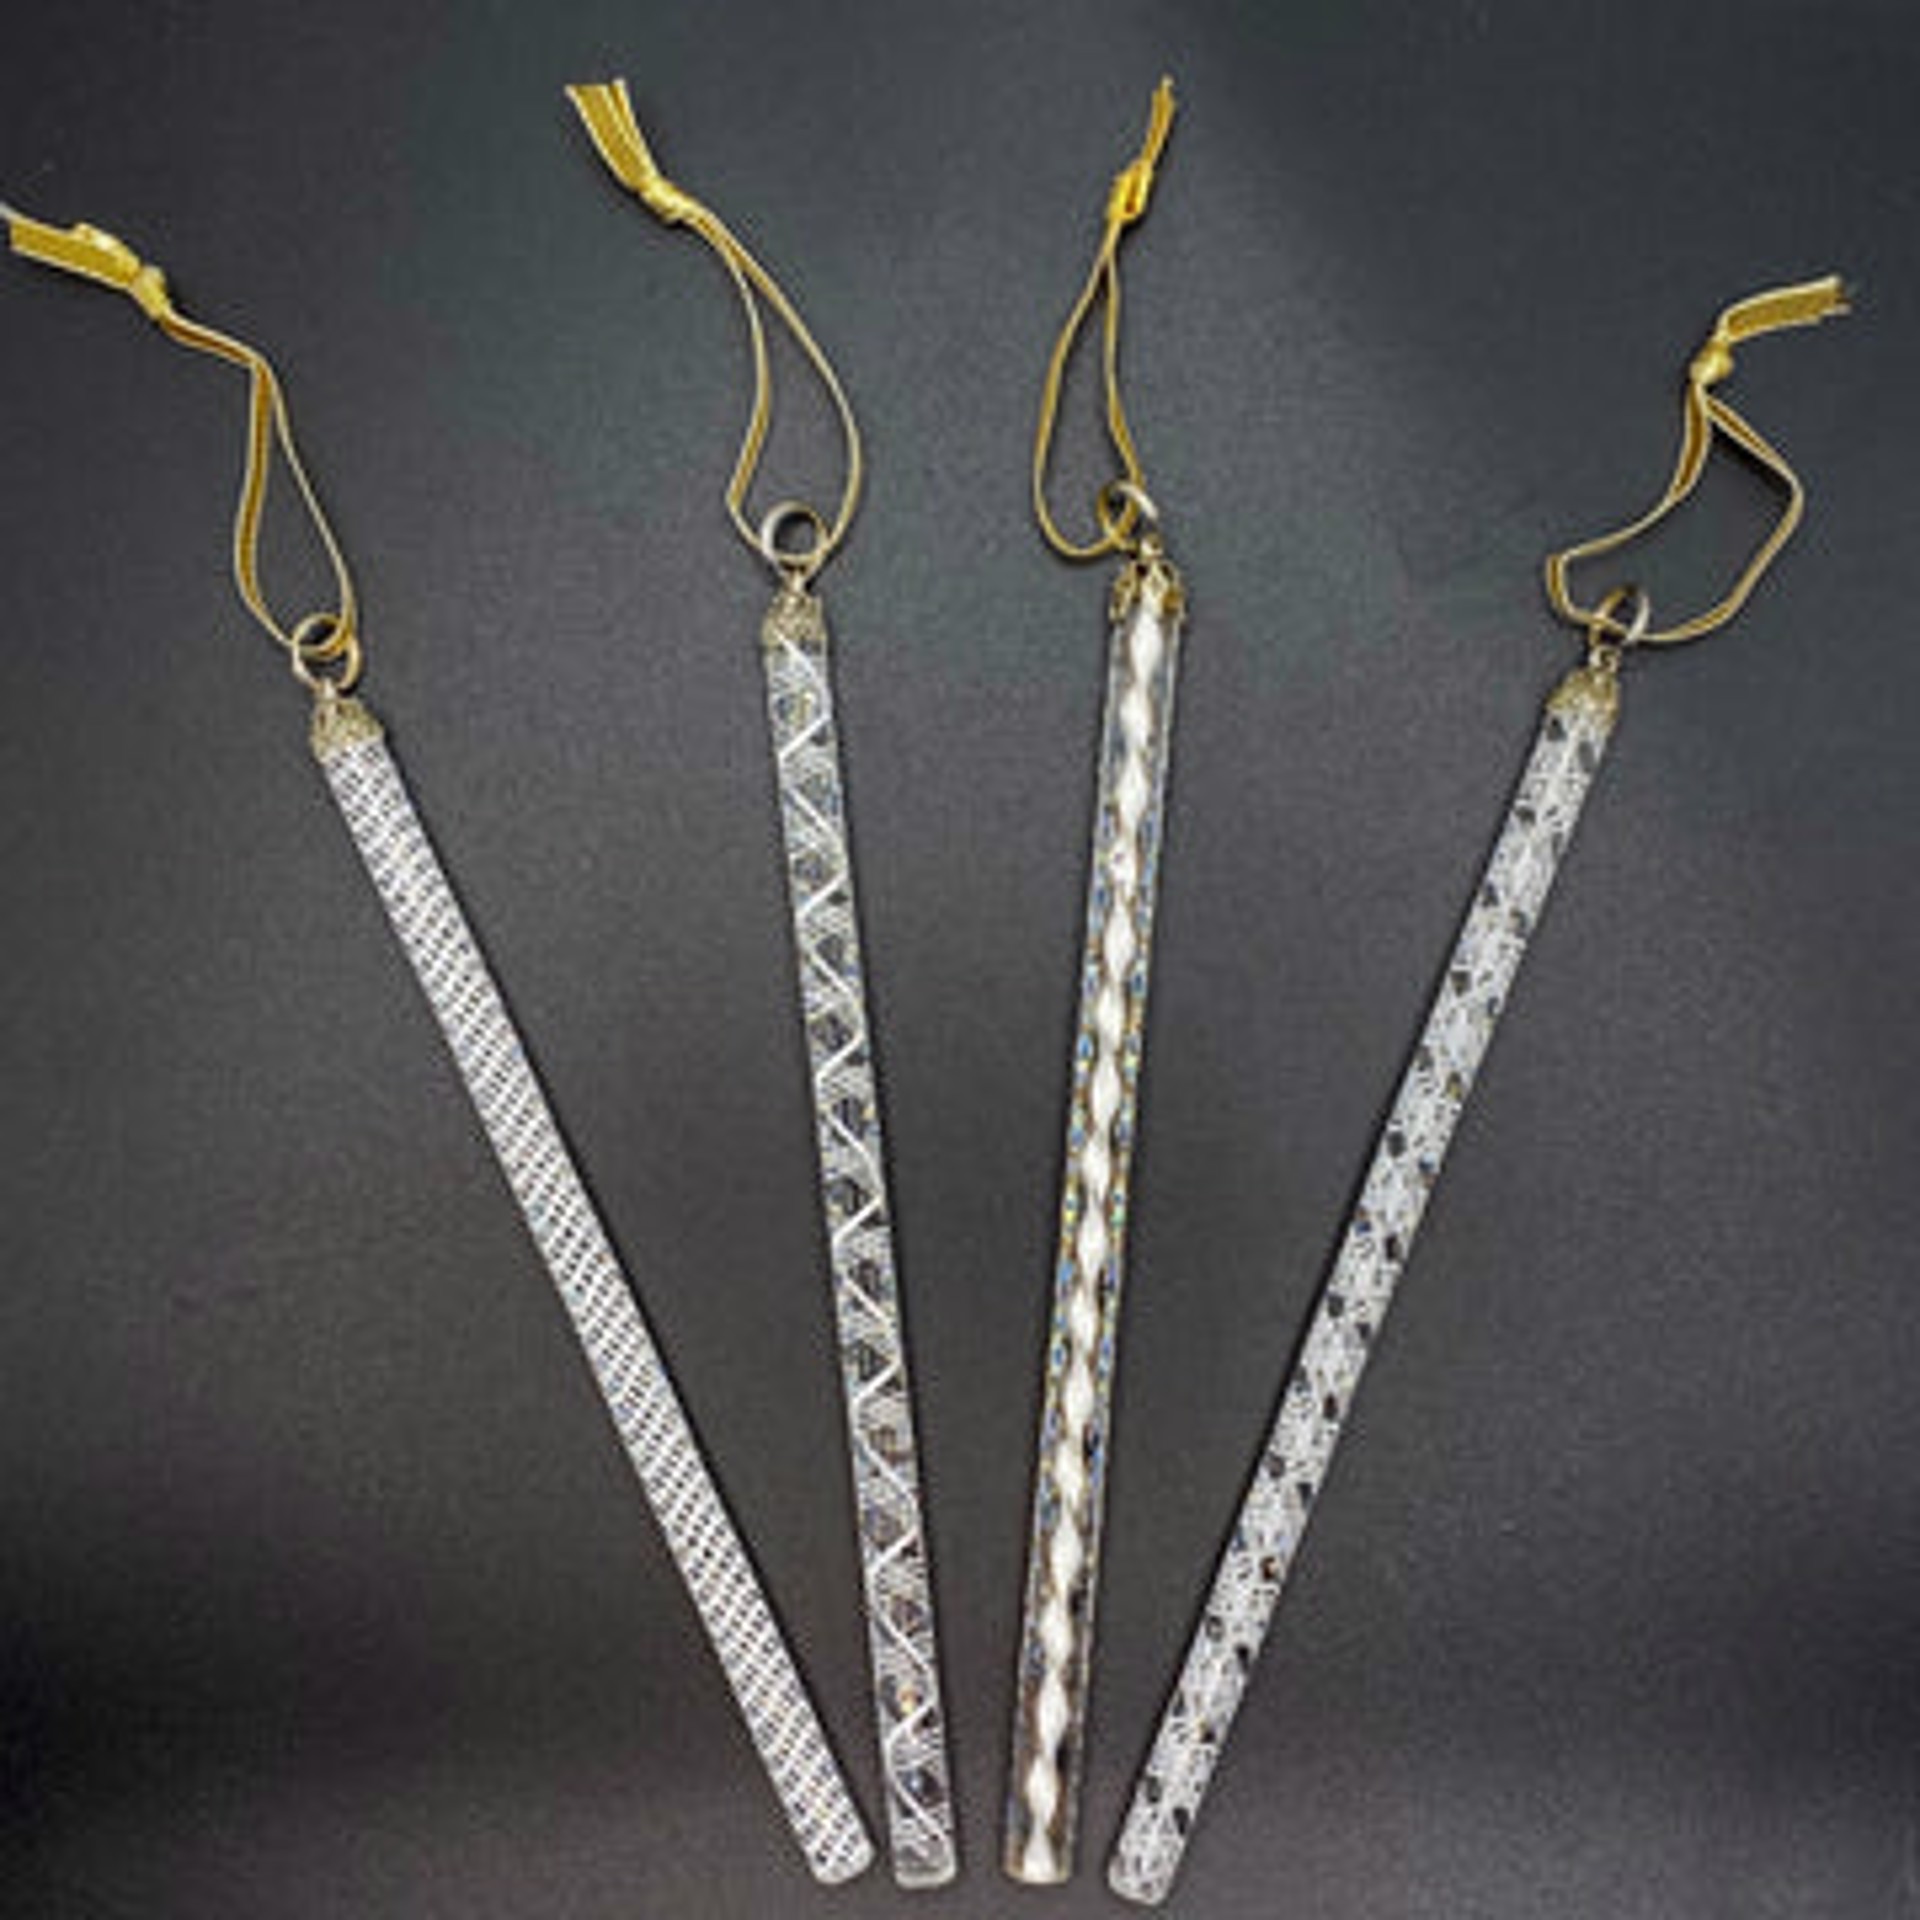 Art Glass Icicles -  White Filigree Mix  -  (boxed set of 4) 202996 by Virginia Wilson Toccalino